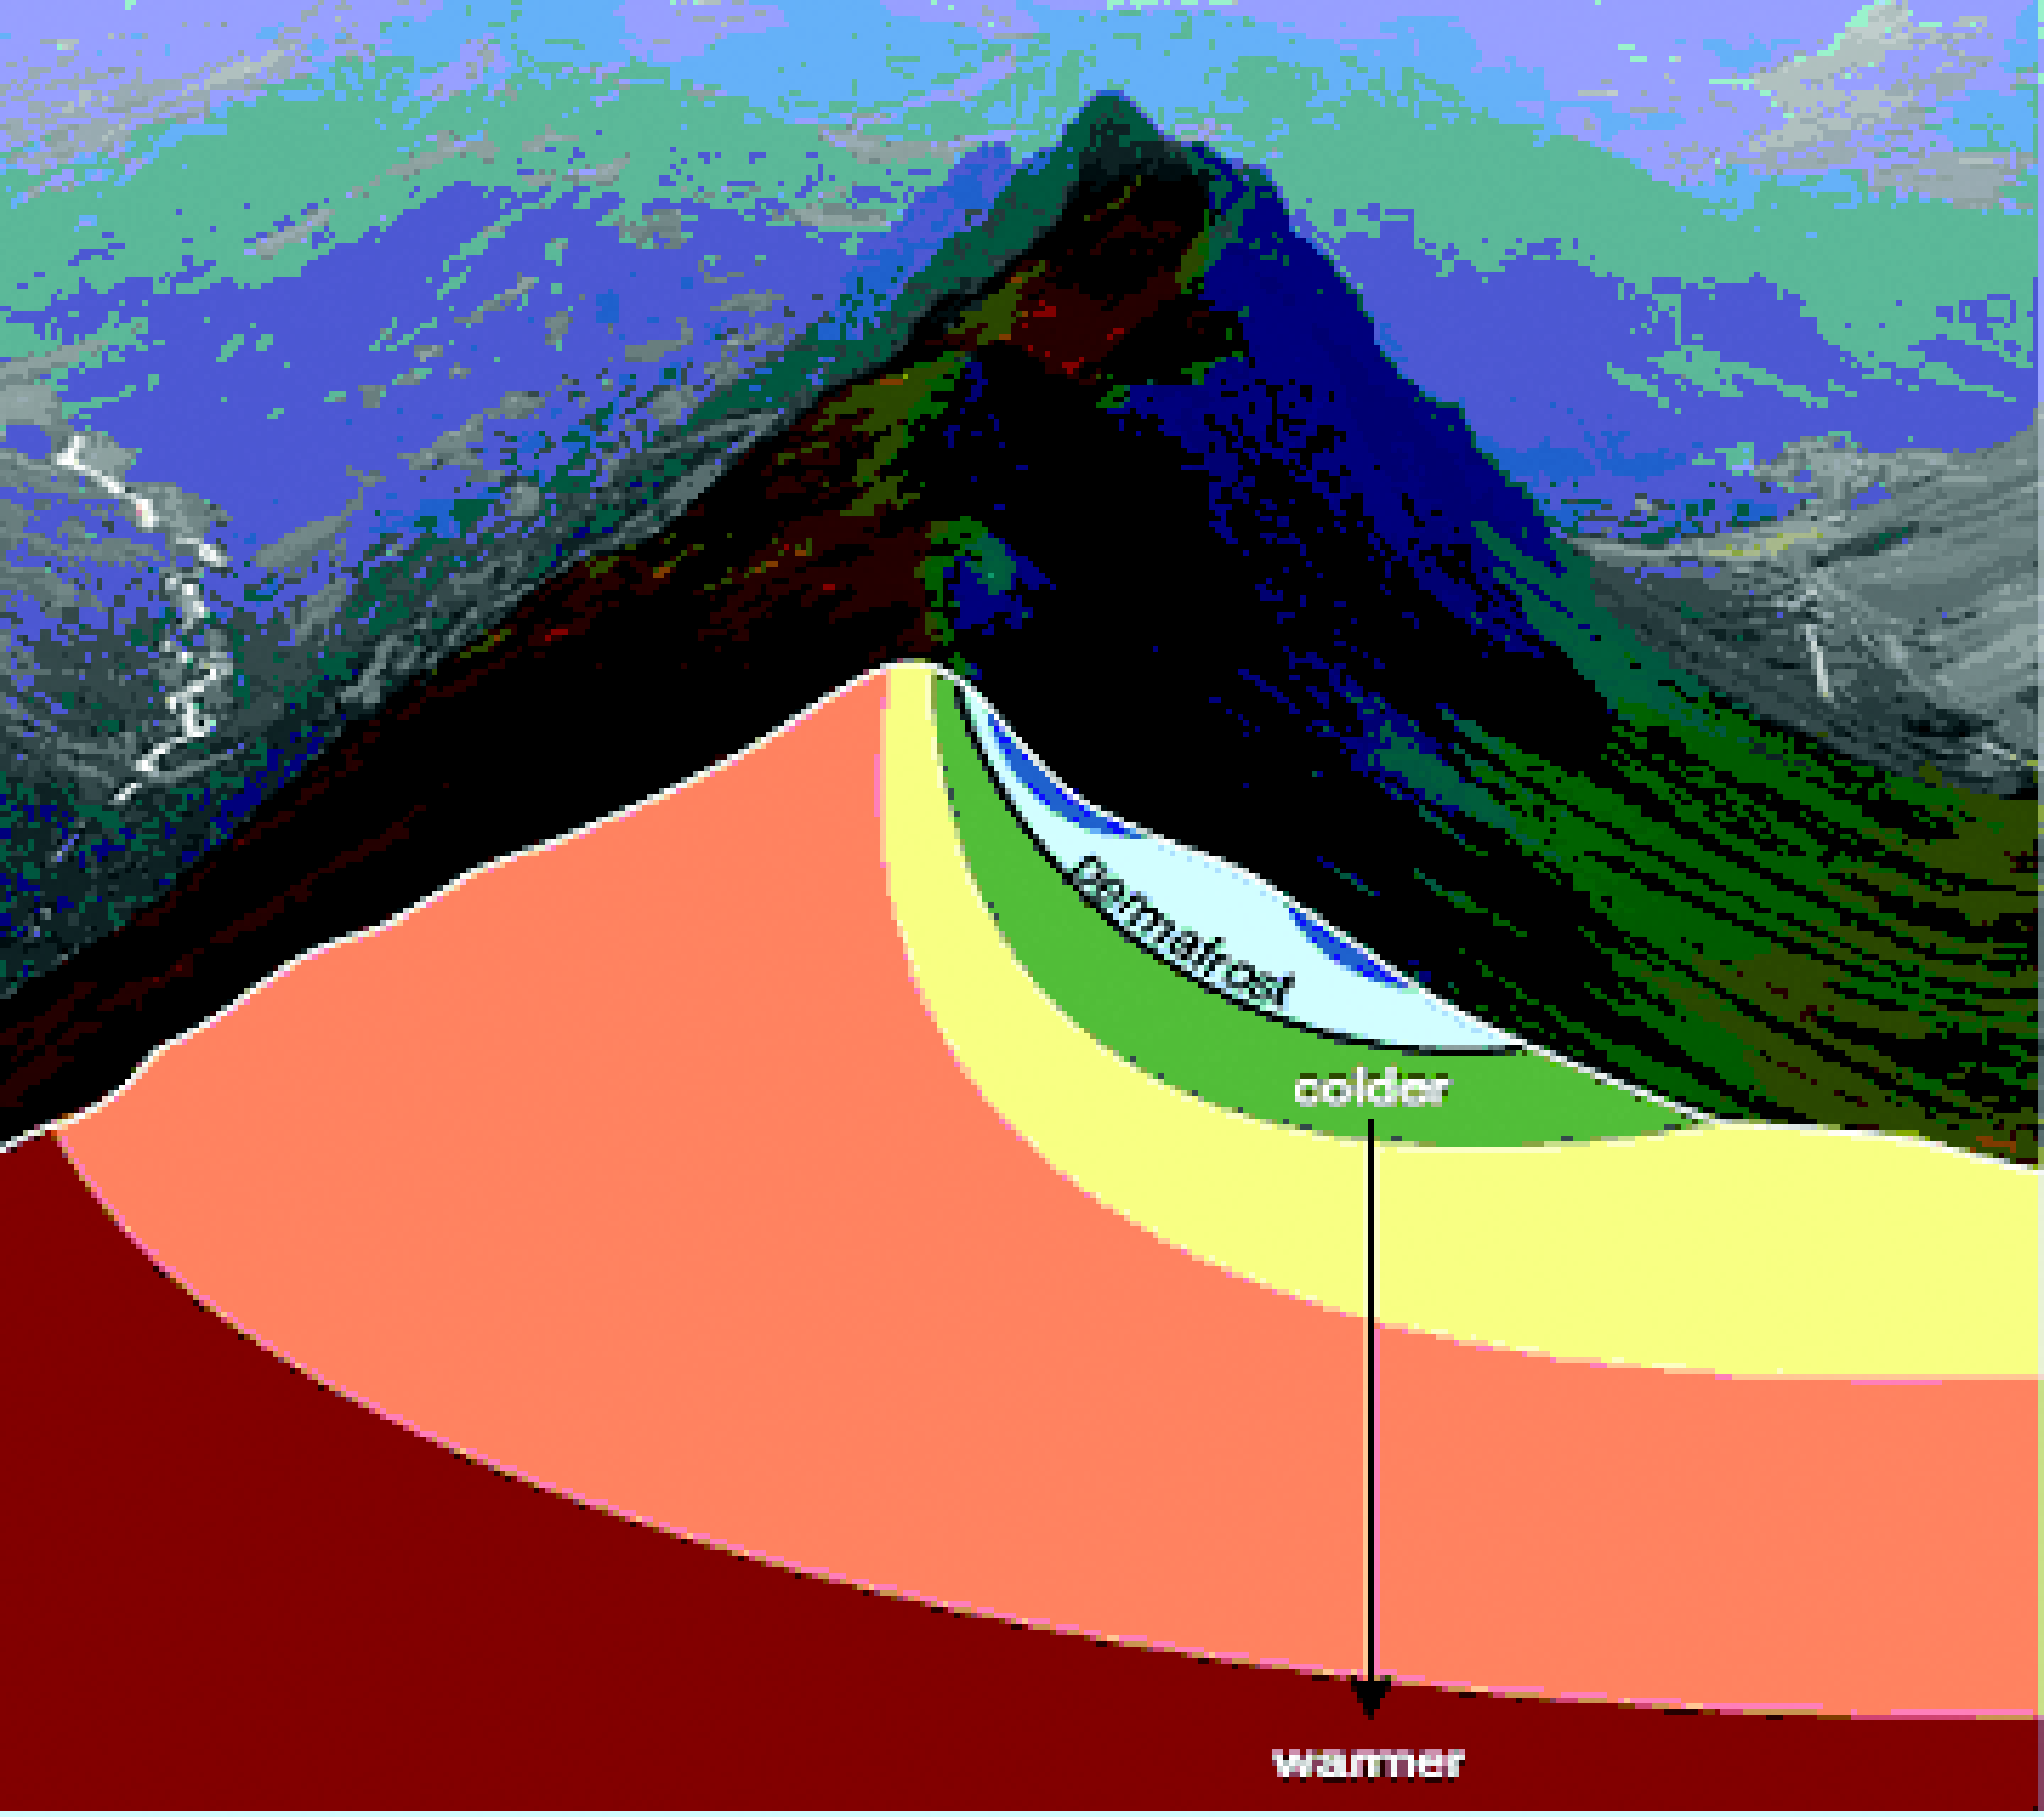 Temperature distribution within a mountain range containing permafrost